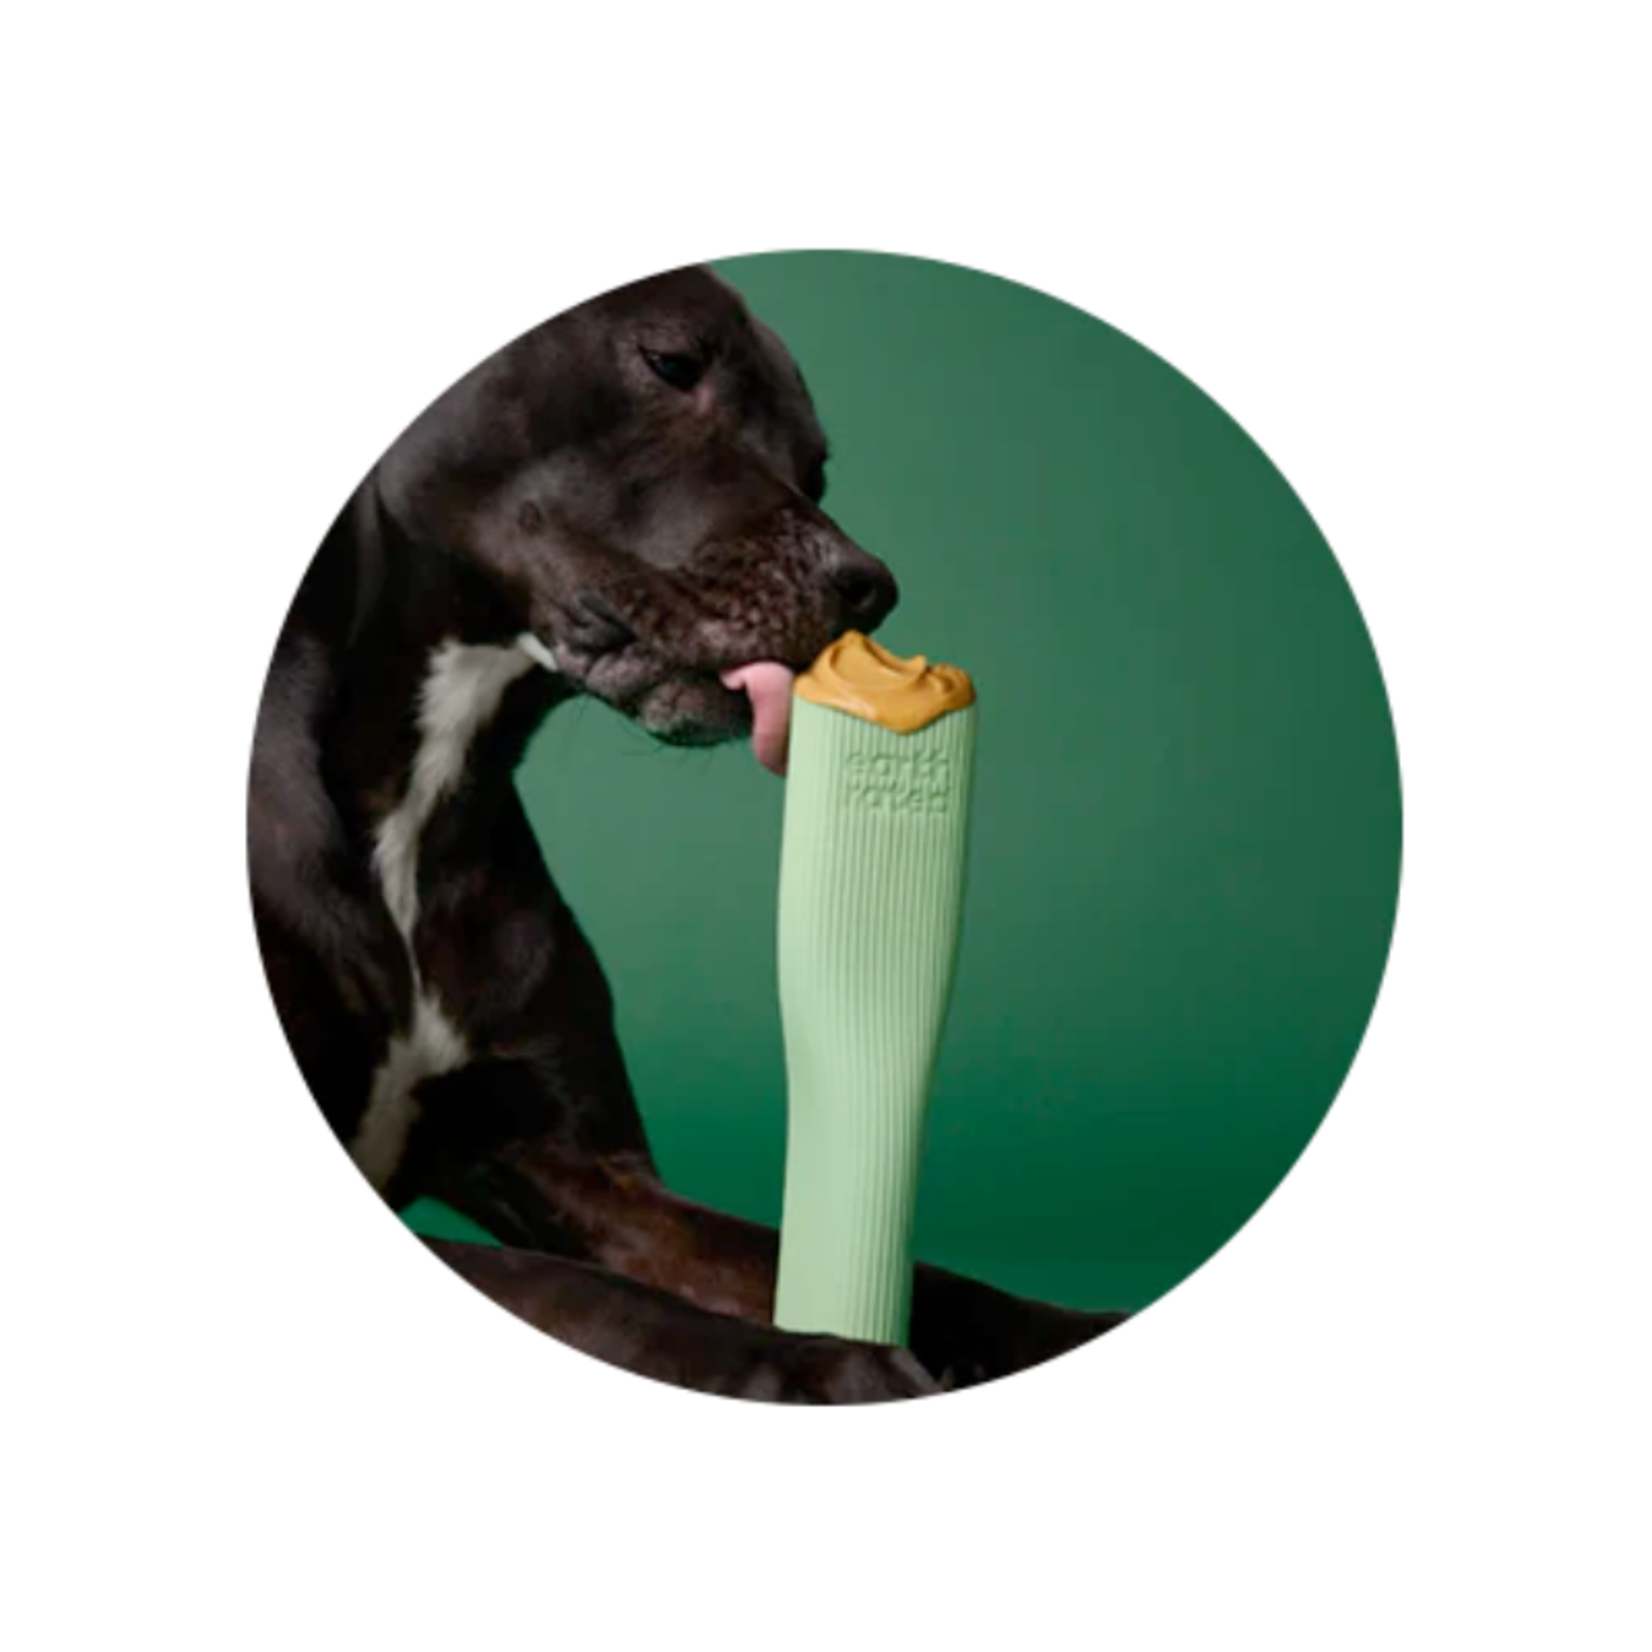 Earth Rated Stuffable Chew Toy - Natural Rubber - Earth Rated